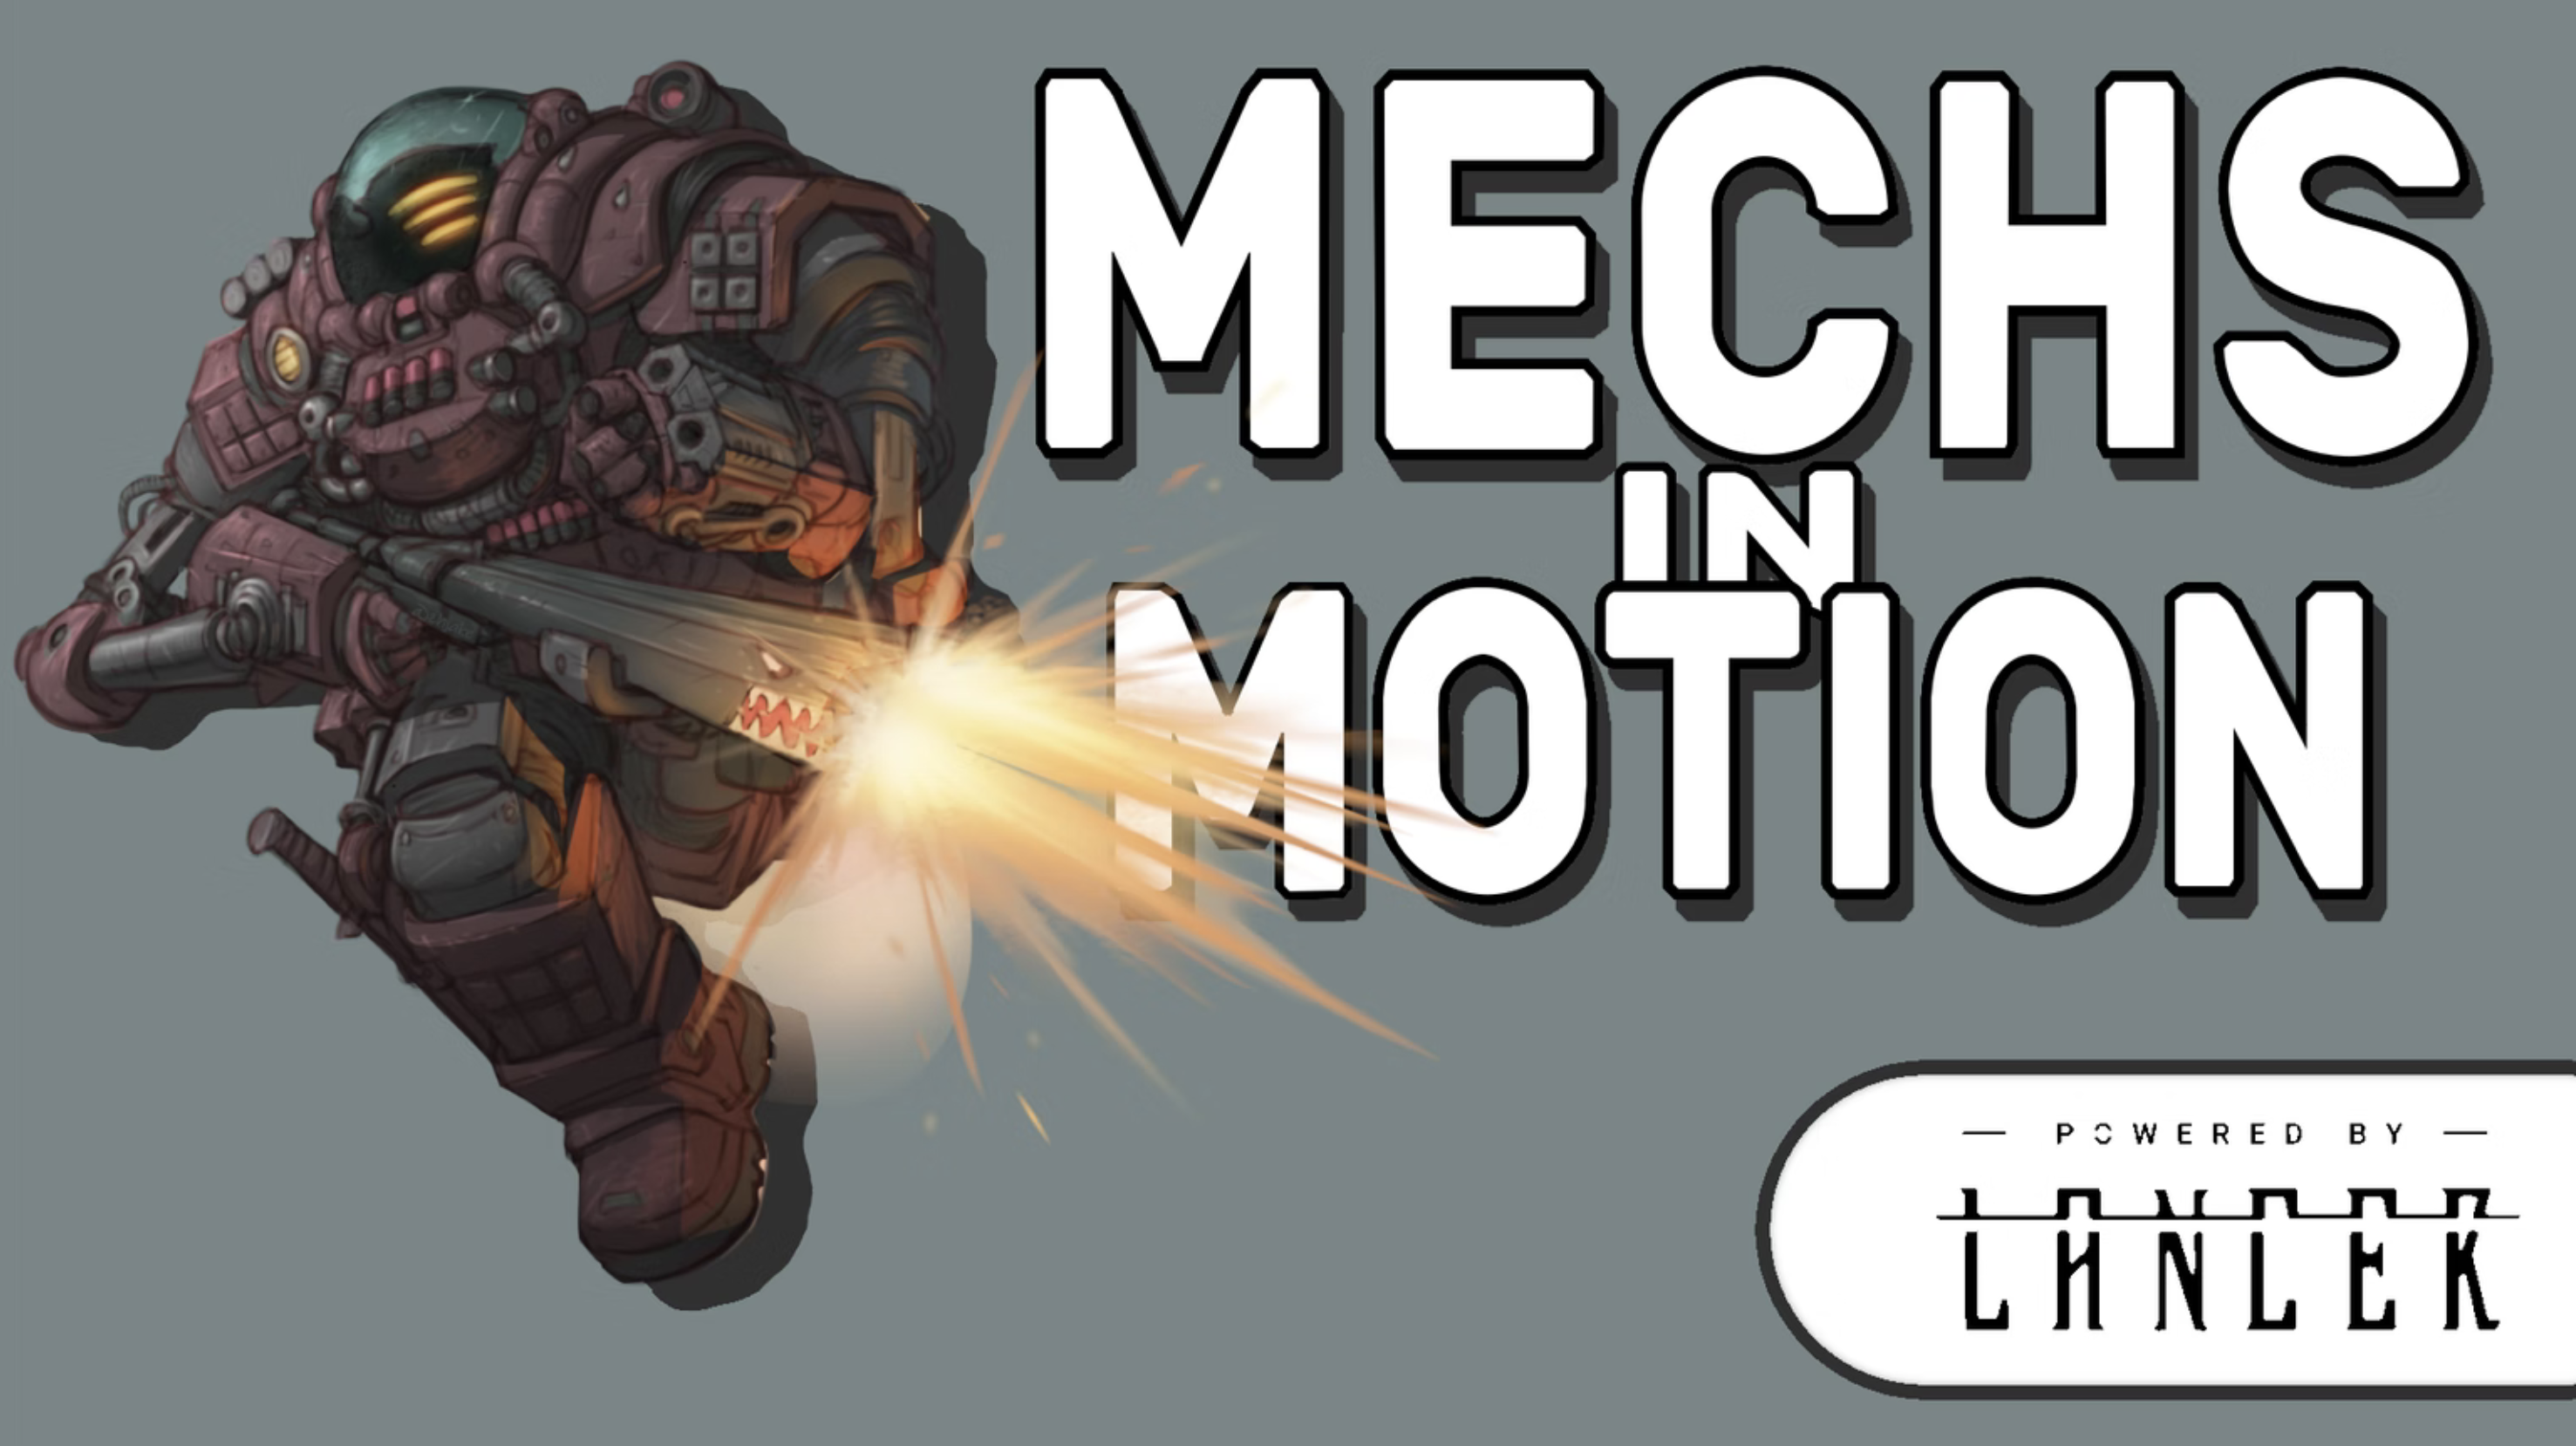 Mechs in Motion Action Tracker